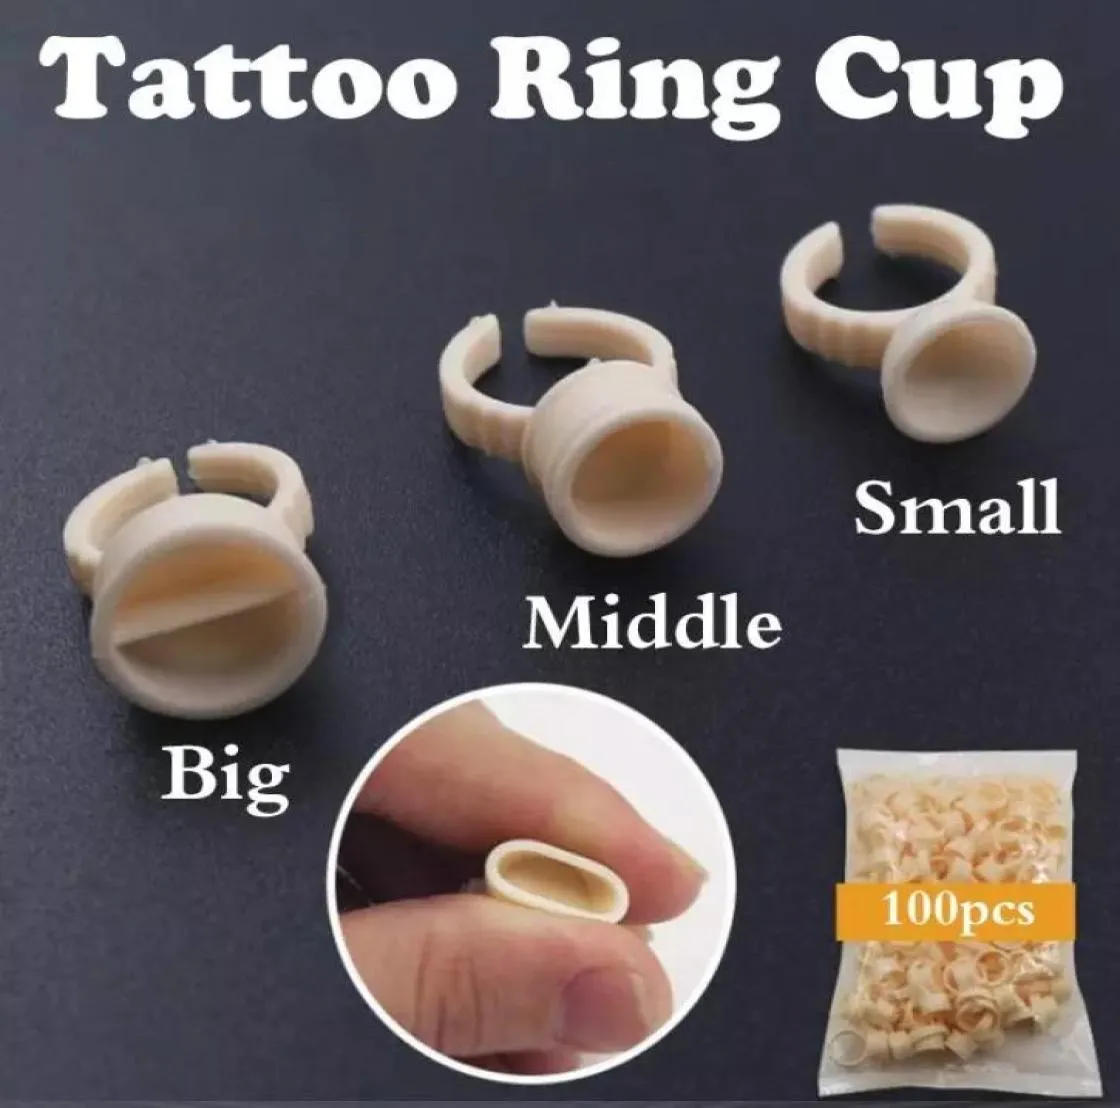 100pcs Disposable Silicone Tattoo Ink Rings Cup Permanent Makeup Pigment Holder Eyebrow Eyelash Extension Glue Divider Container3633241